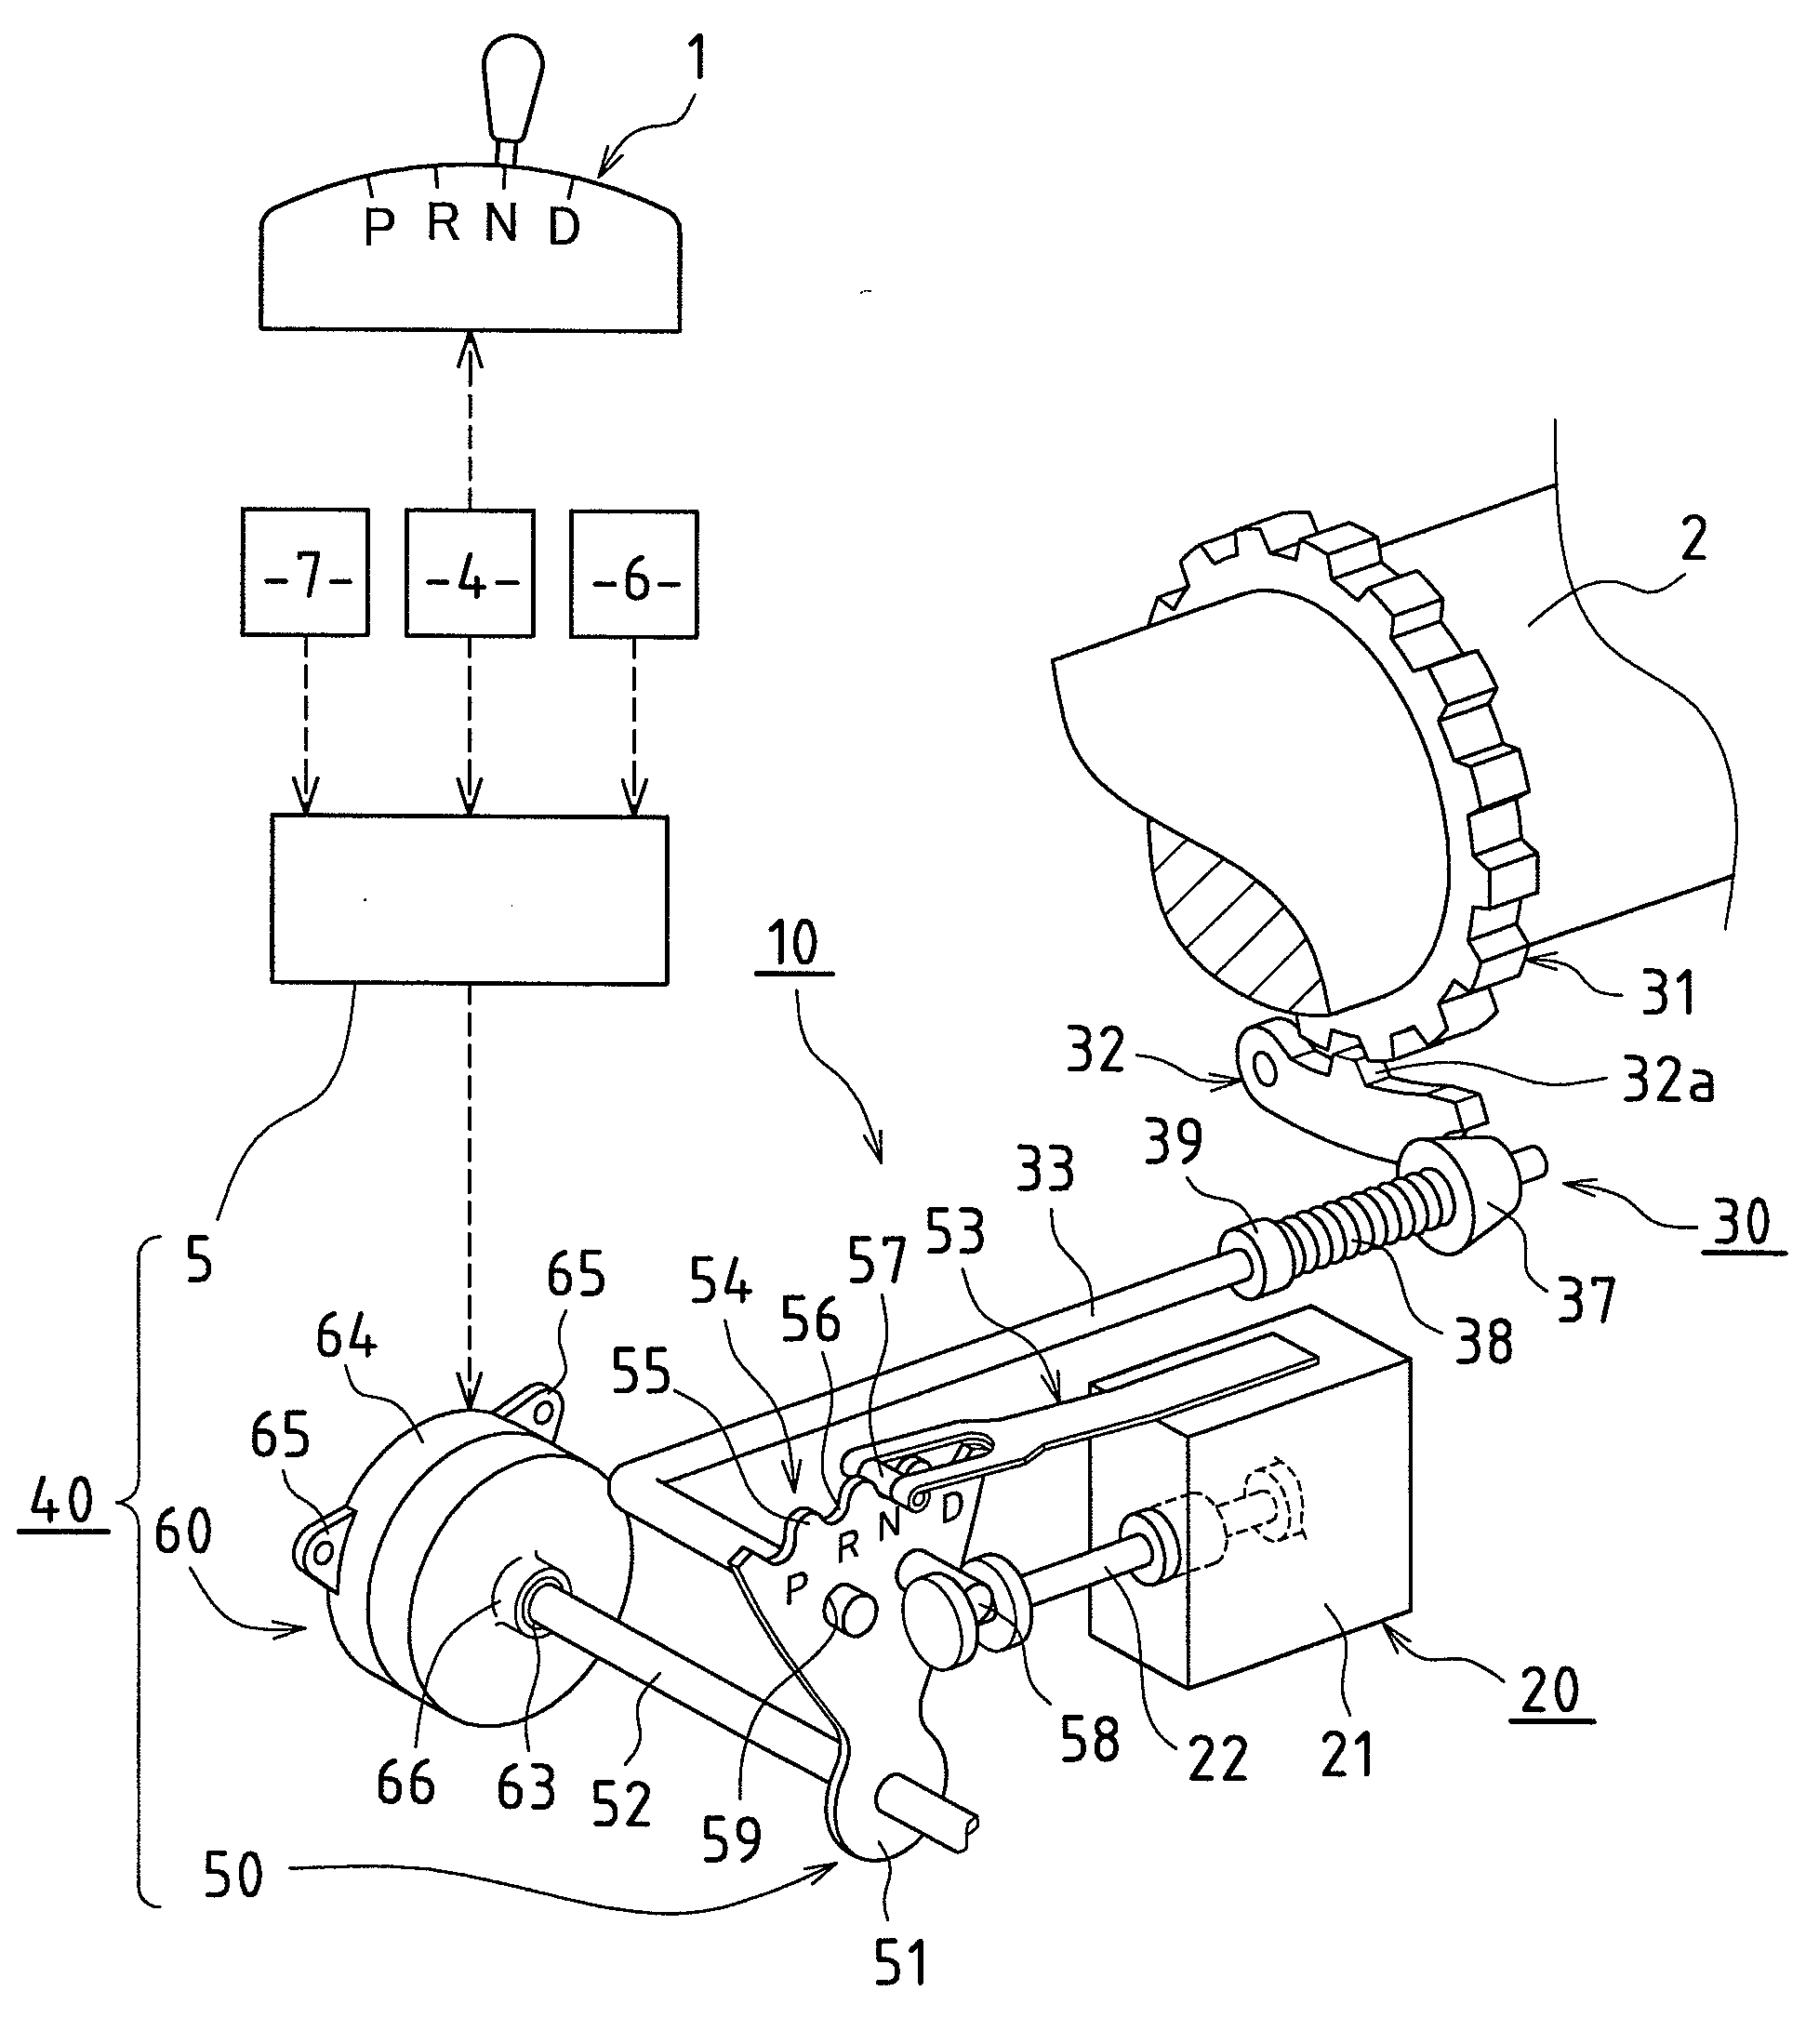 State-changing element operating device, range changing device for automatic transmission, and parking apparatus